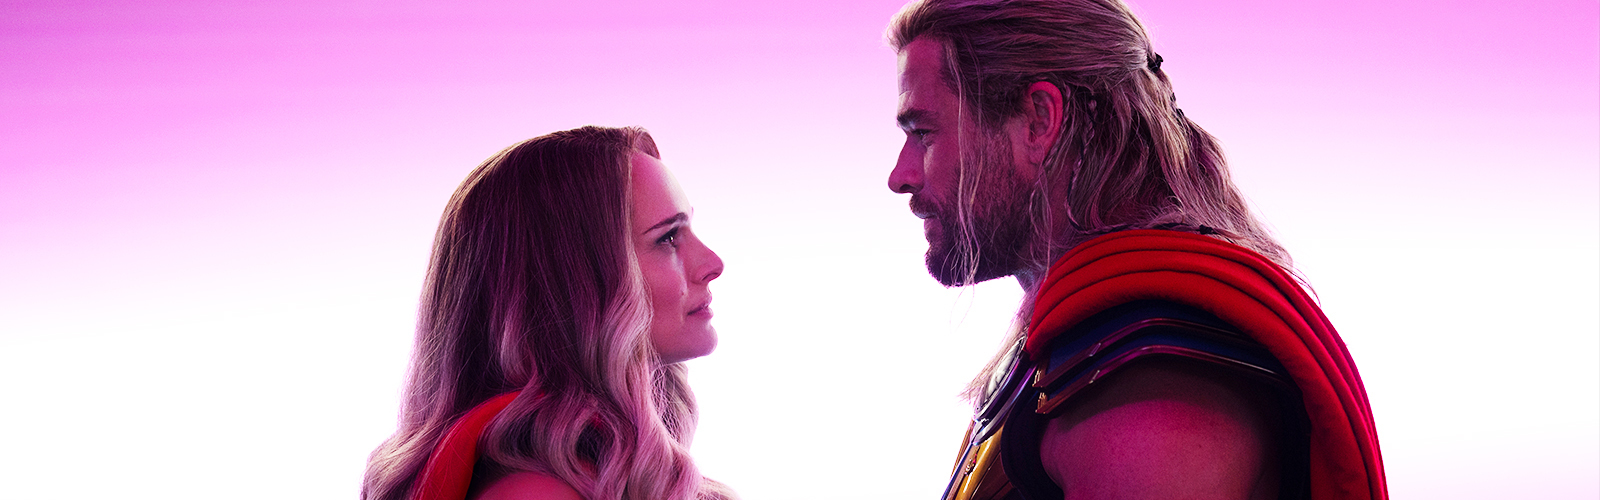 Natalie POrtman and Chris Hemsworth in Thor Love And Thunder